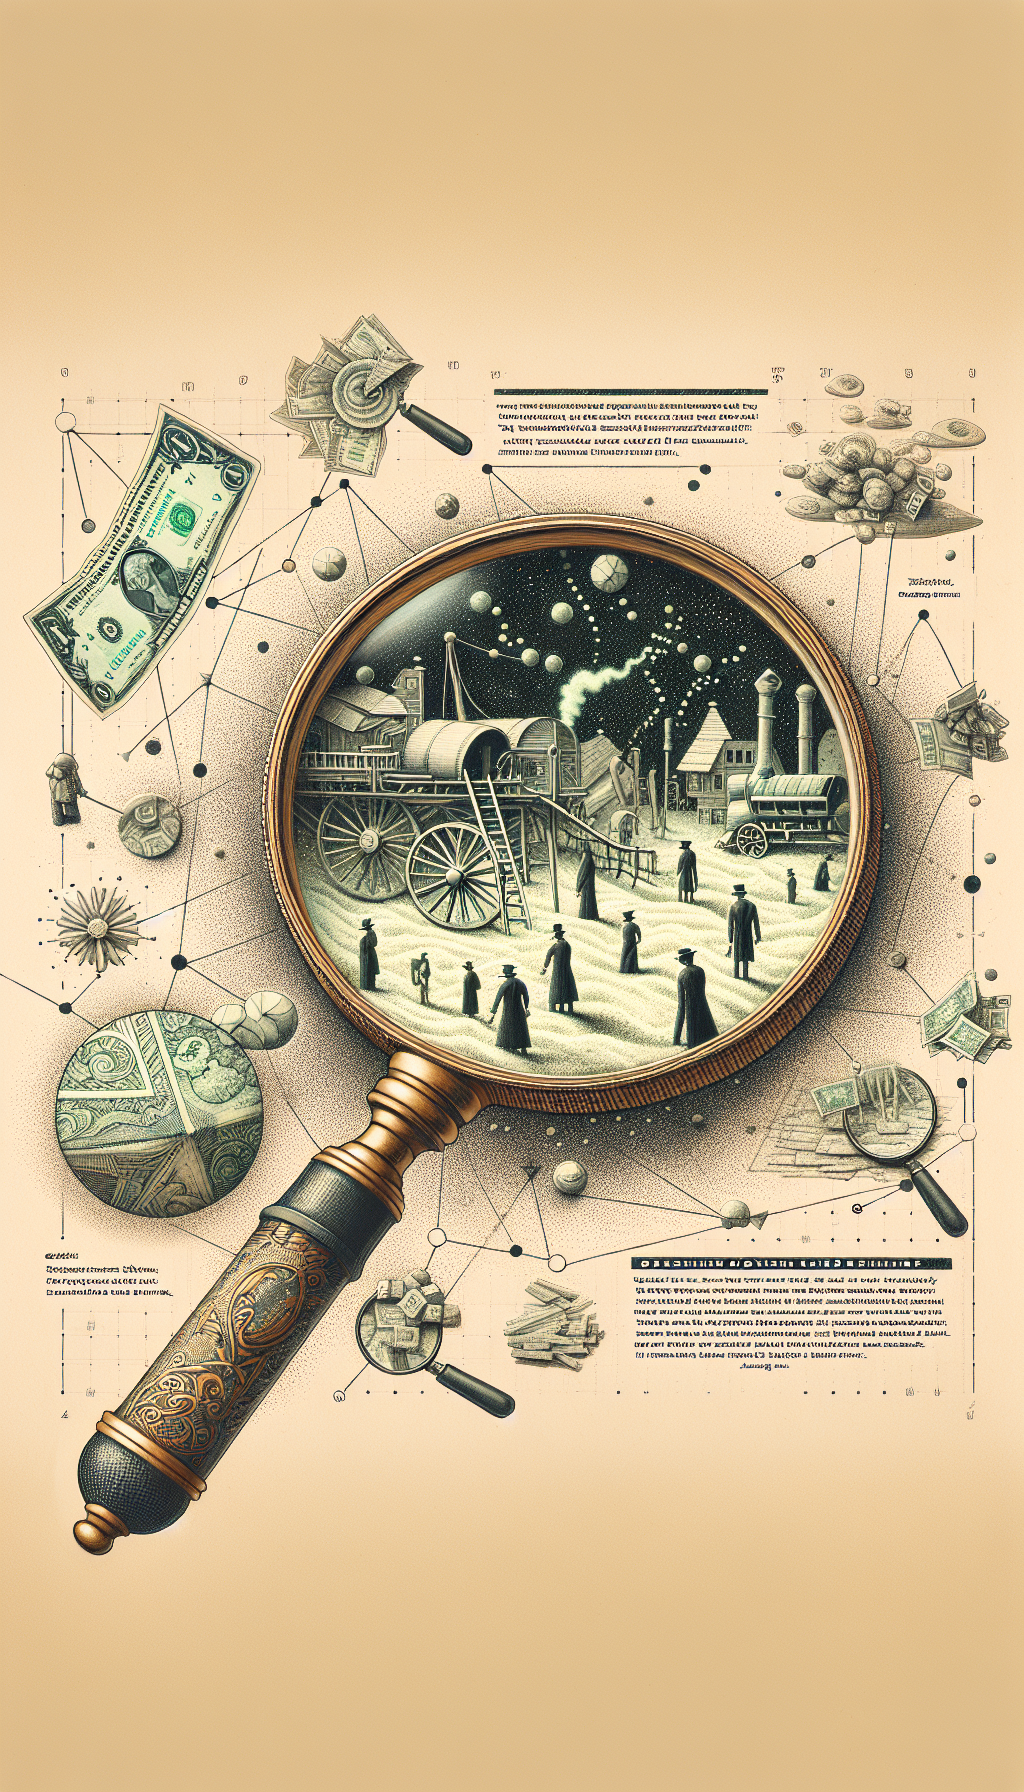 An intricate, whimsical drawing features a magnifying glass revealing a hidden world within a dust particle, where tiny figures assess the ornate details of antique furniture. Dotted lines connect local landmarks to suggest proximity, with vintage dollar bills floating towards a geographical pin, symbolizing the lucrative results of nearby antique furniture appraisals.